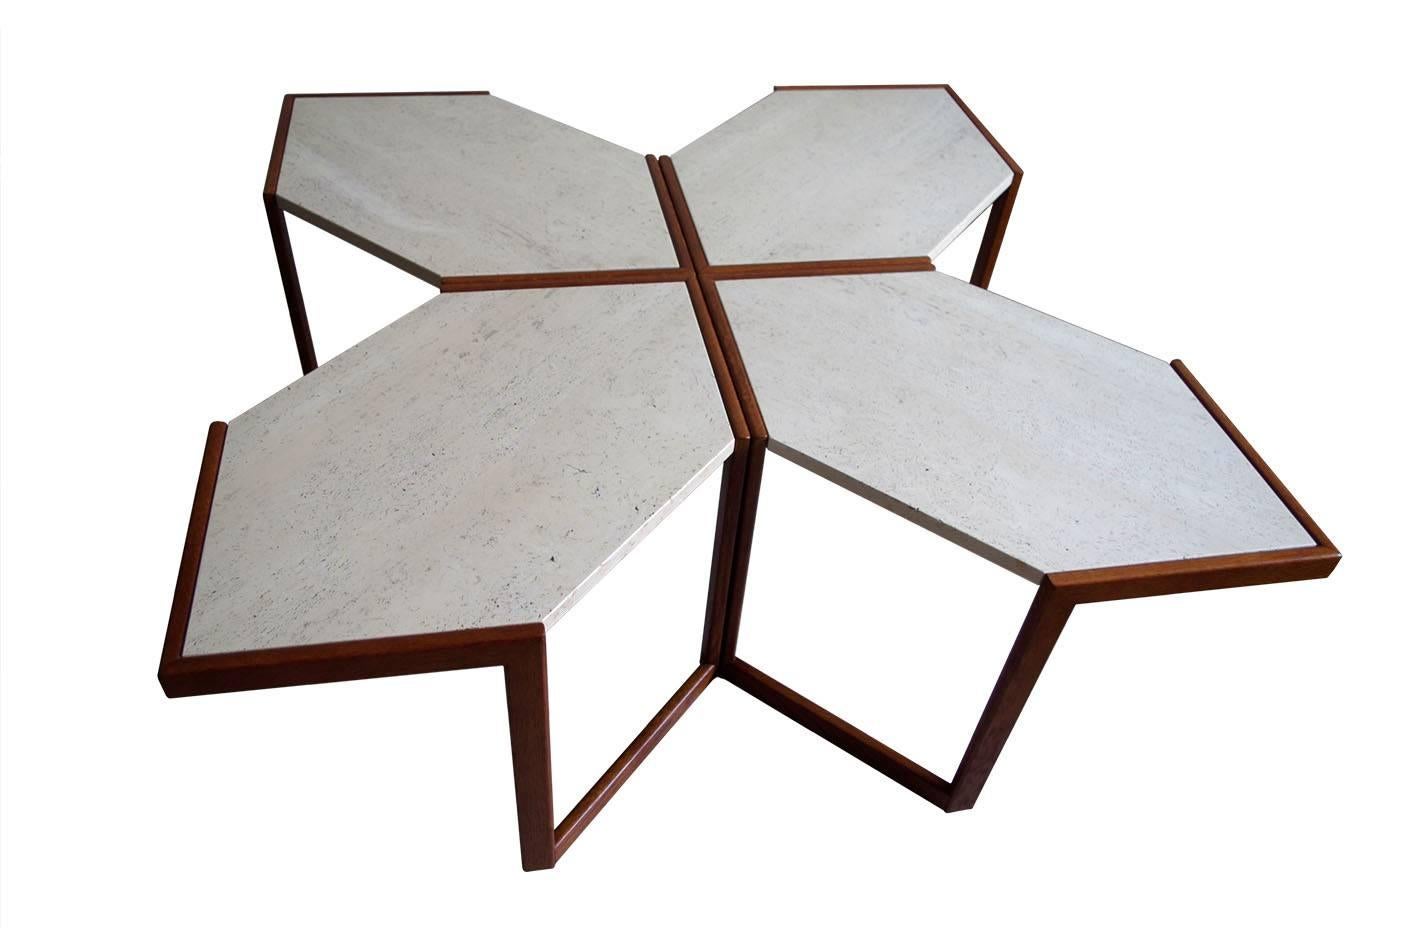 Travertine Set of Four Italian Modular Wood and Stone Coffee Side Sofa Tables, 1960s For Sale